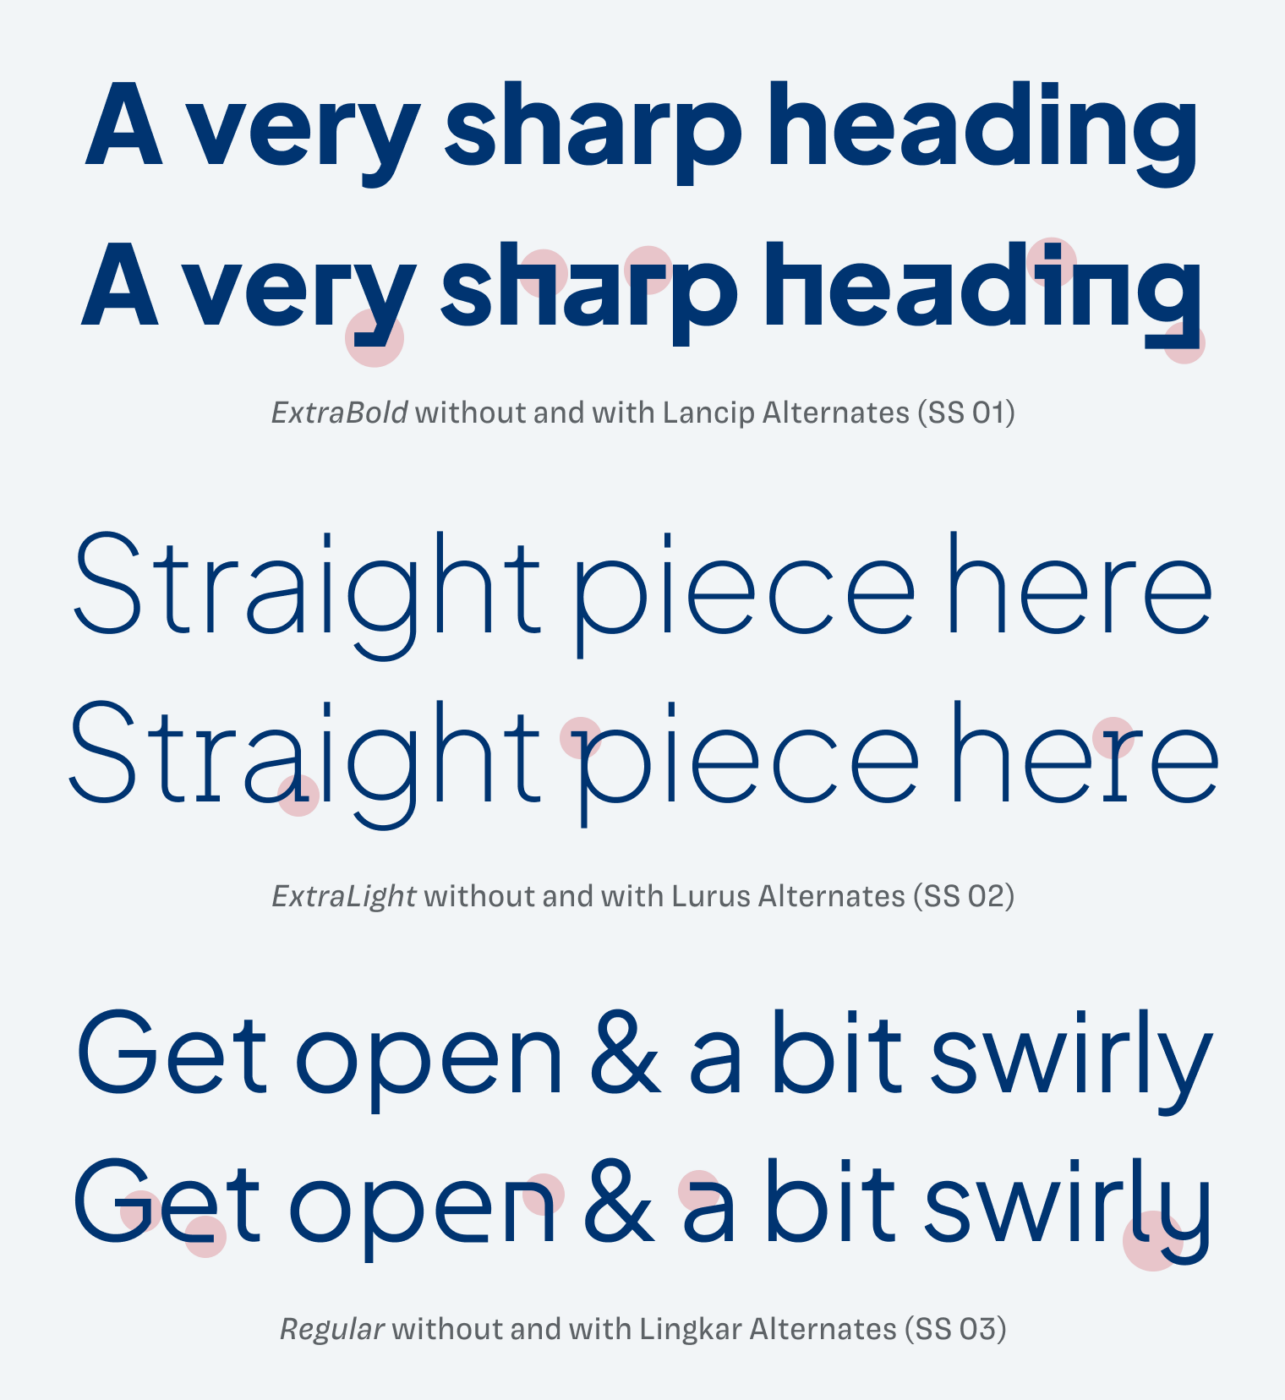 A very sharp heading ExtraBold without and with Lancip Alternates (SS 01), Straight piece here, ExtraLight without and with Lurus Alternates (SS 02), Get open & a bit swirly, Regular without and with Lingkar Alternates (SS 03)